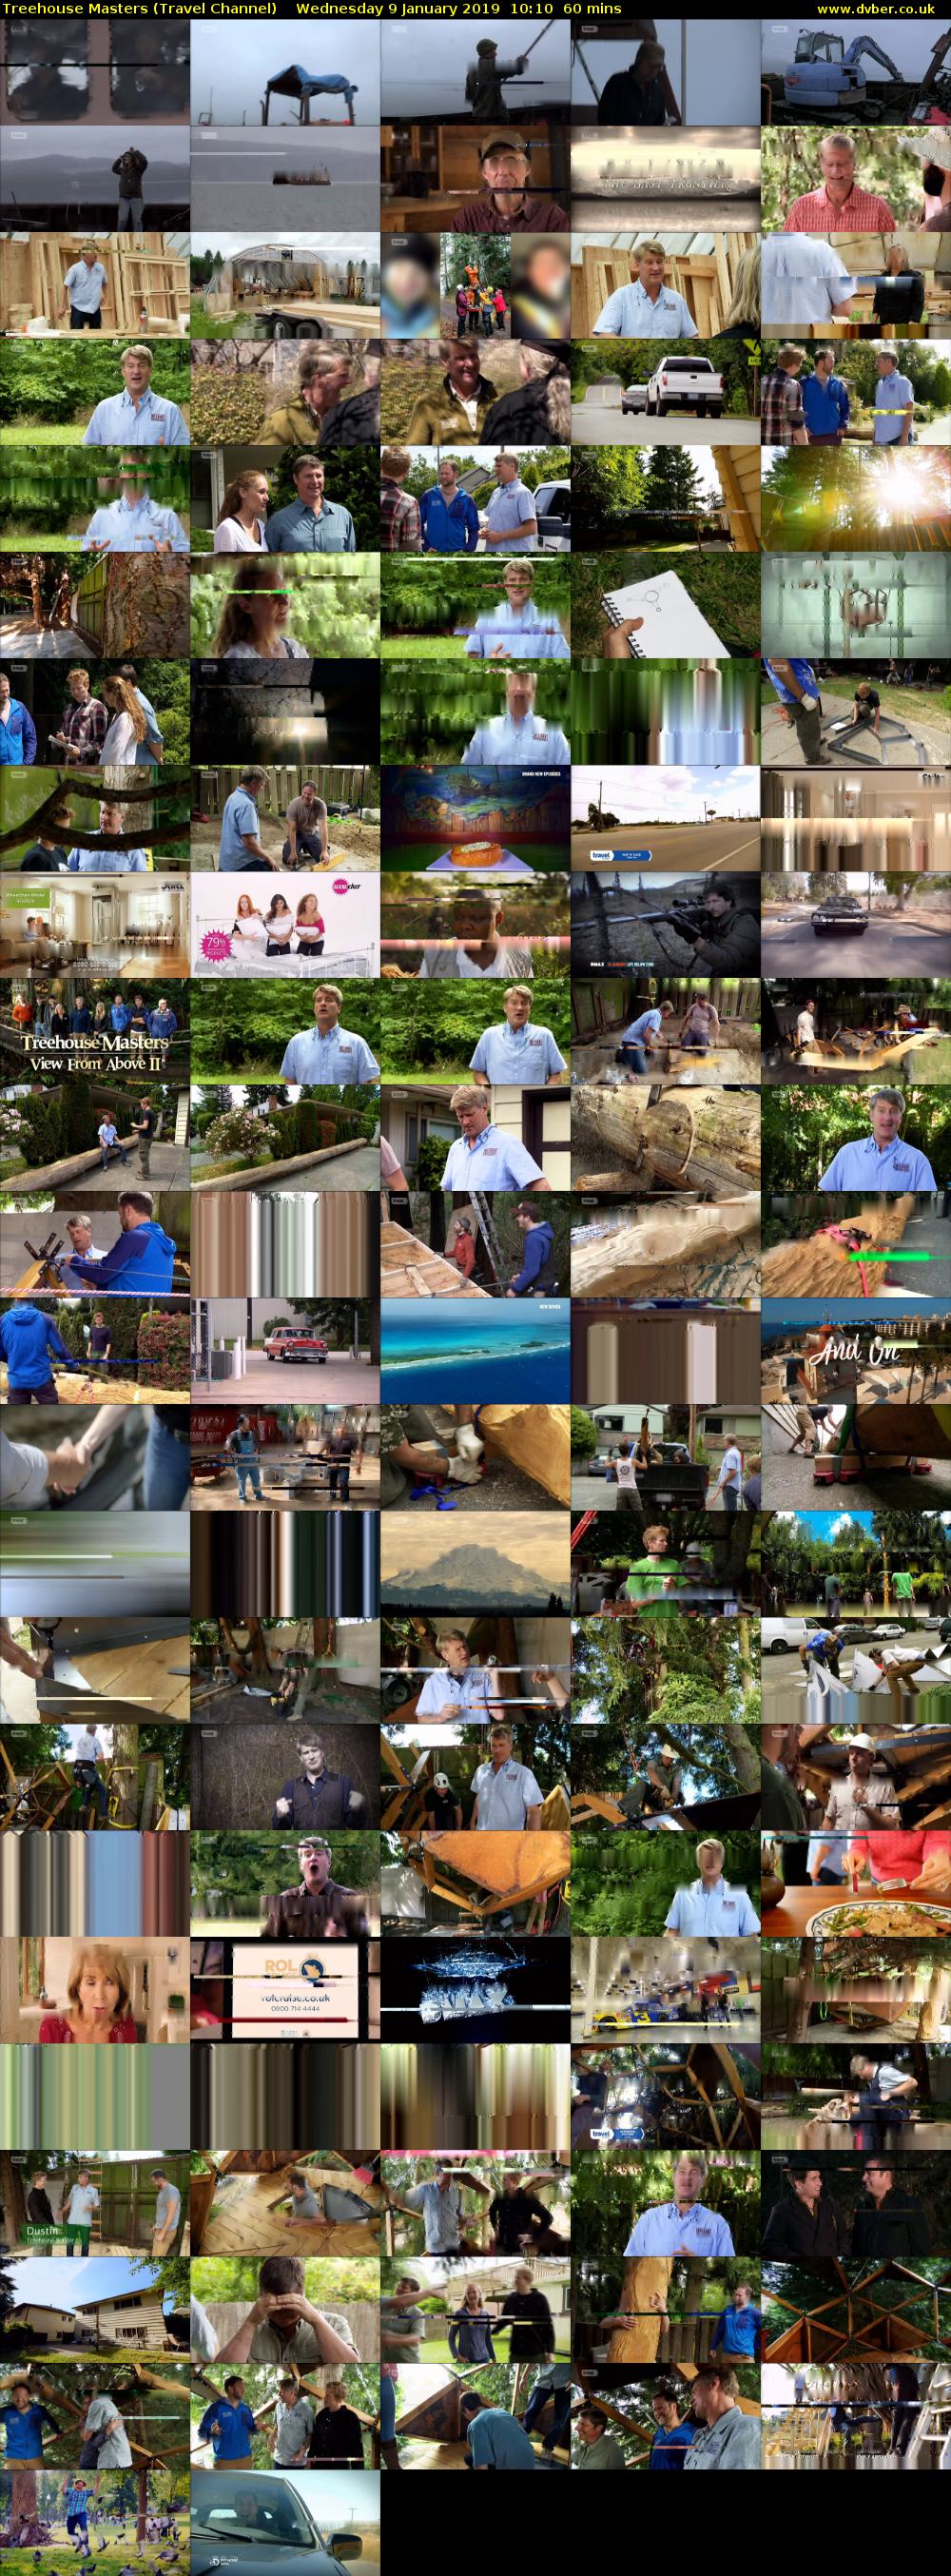 Treehouse Masters (Travel Channel) Wednesday 9 January 2019 10:10 - 11:10